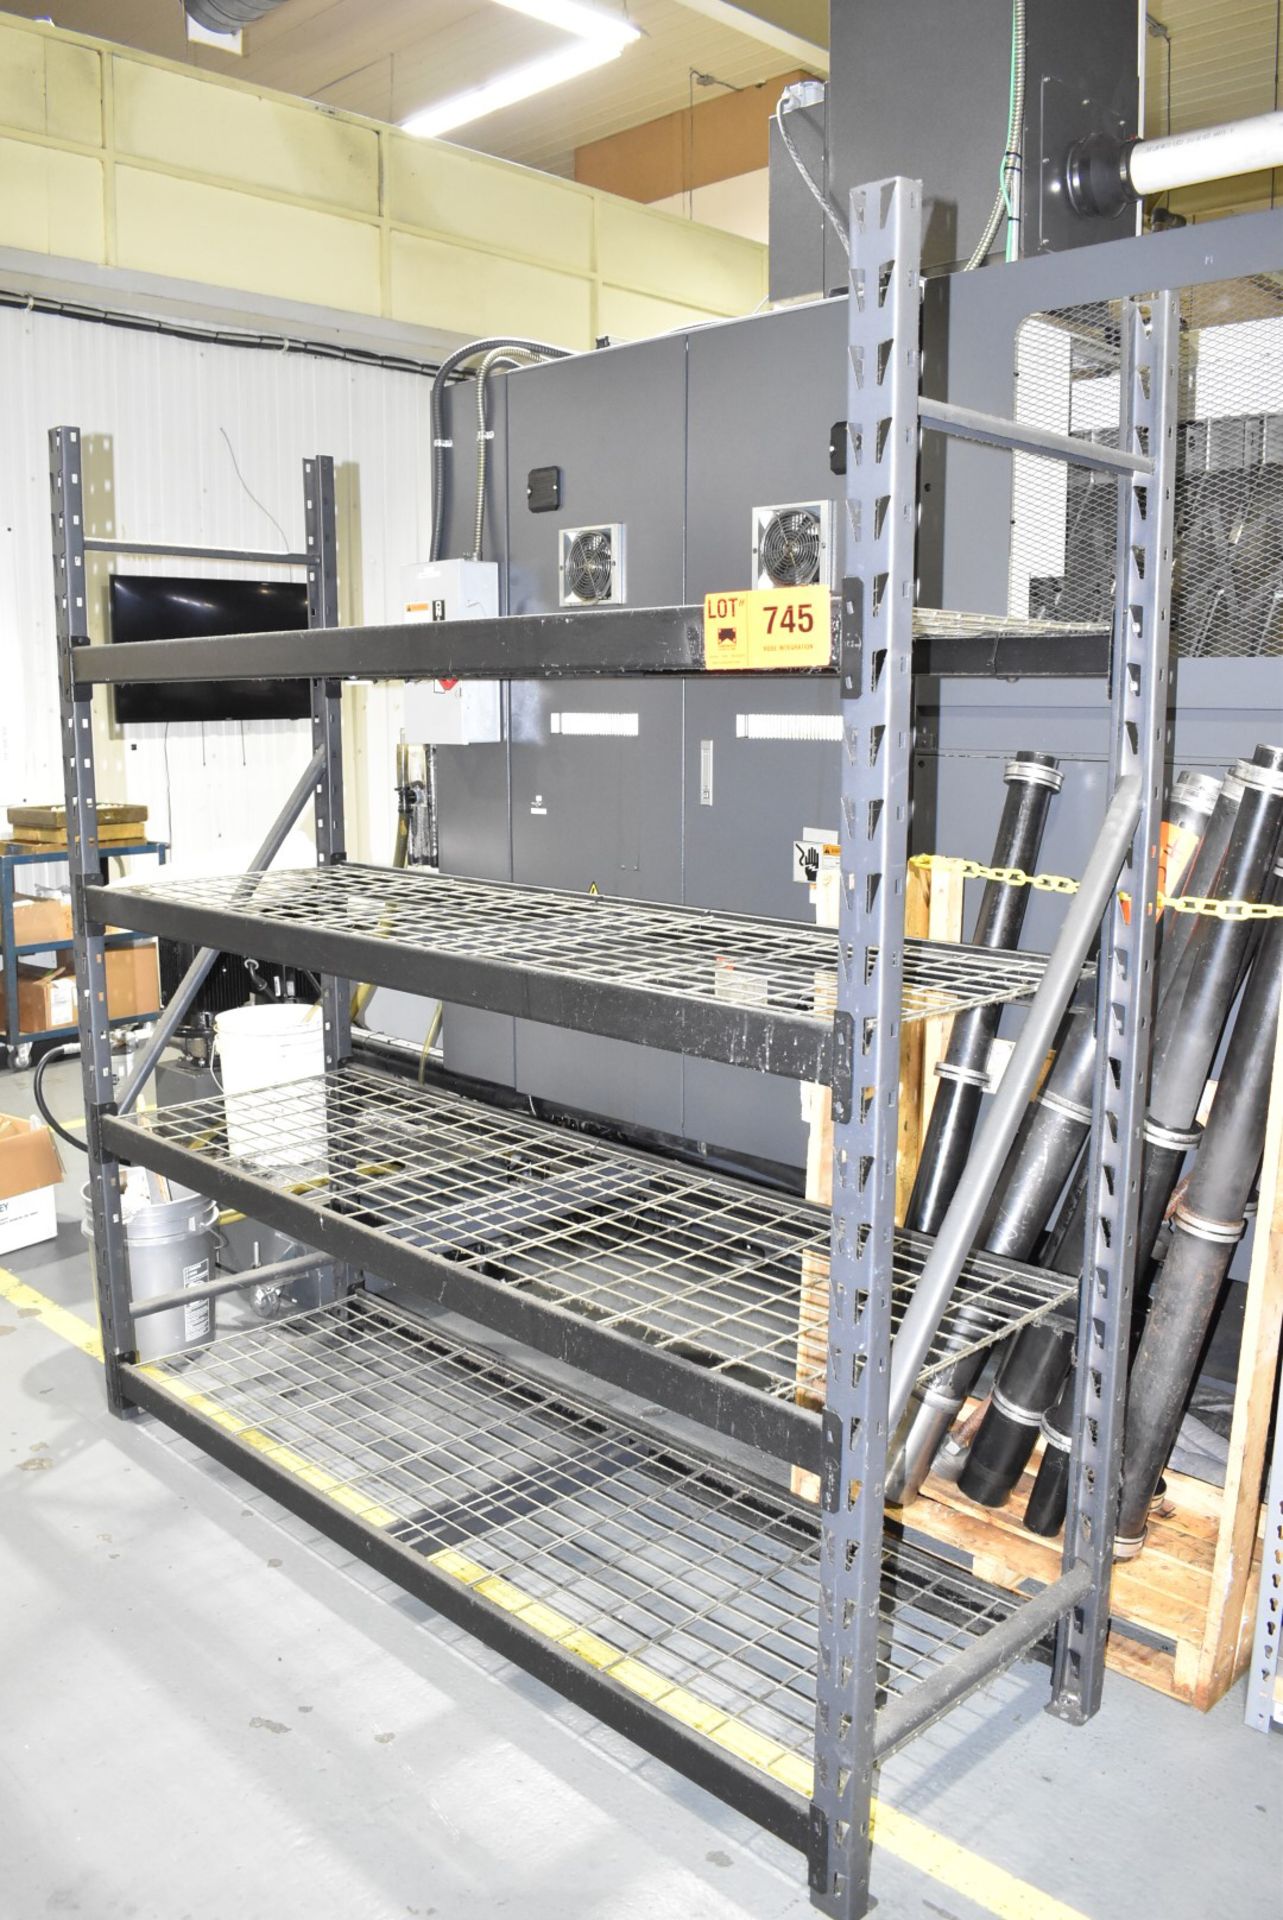 (1) SECTION OF ADJUSTABLE PALLET RACKING, S/N N/A